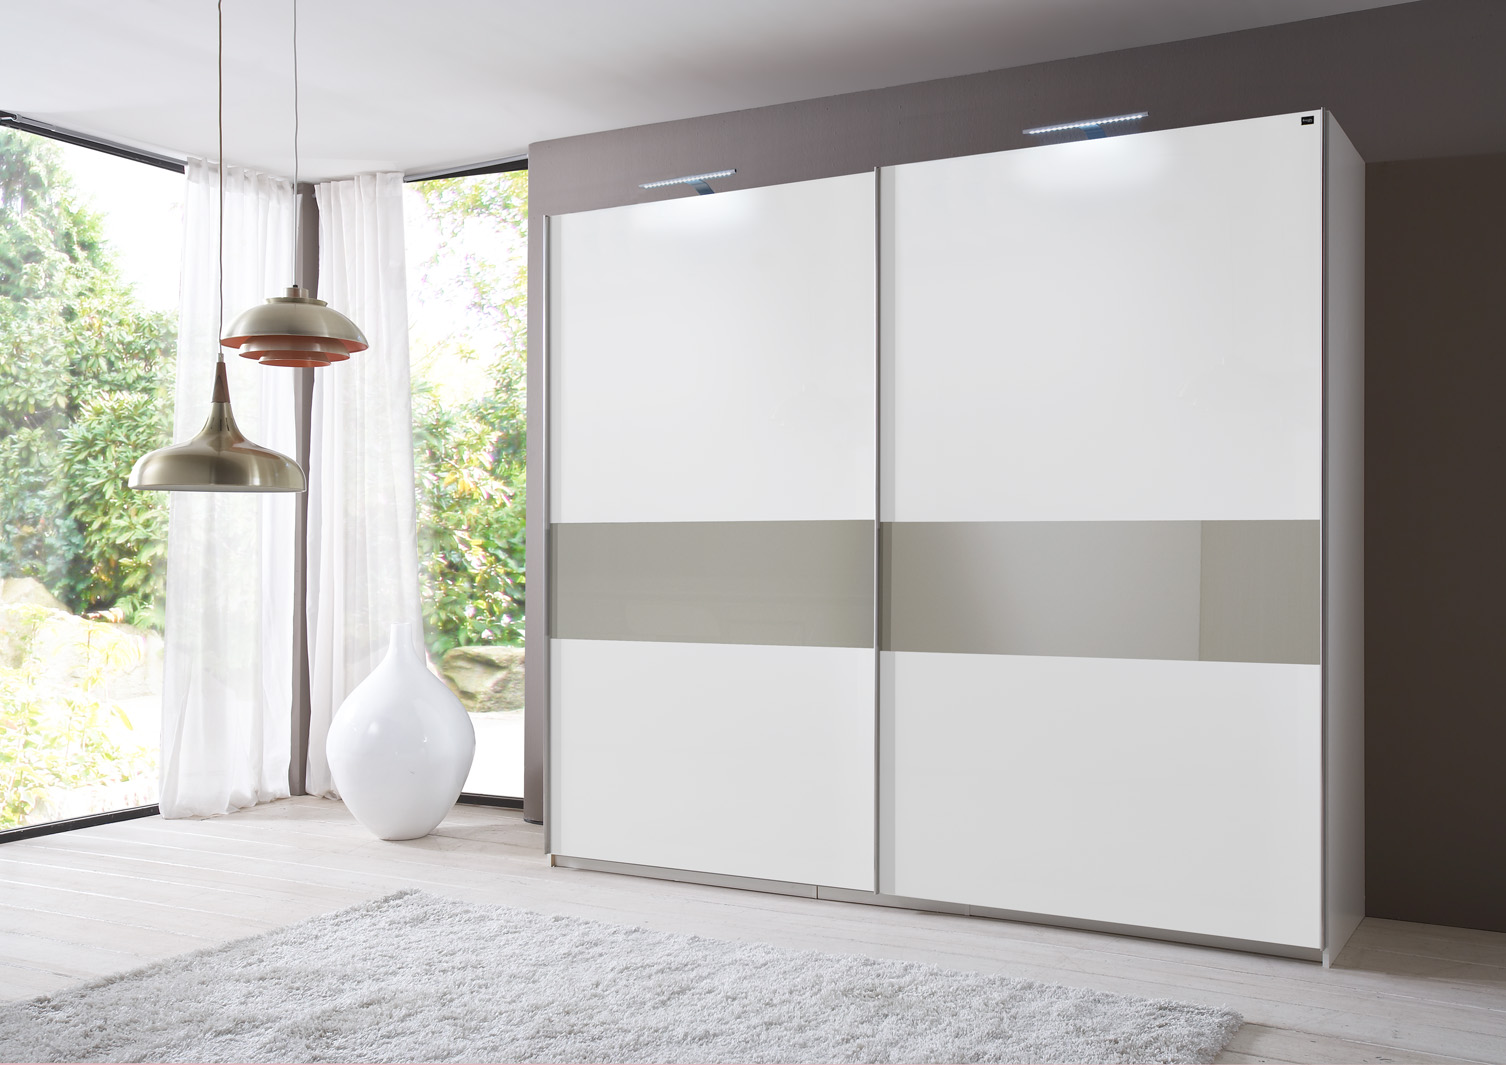 Wardrobes That Don't Need To Be Secured To The Wall